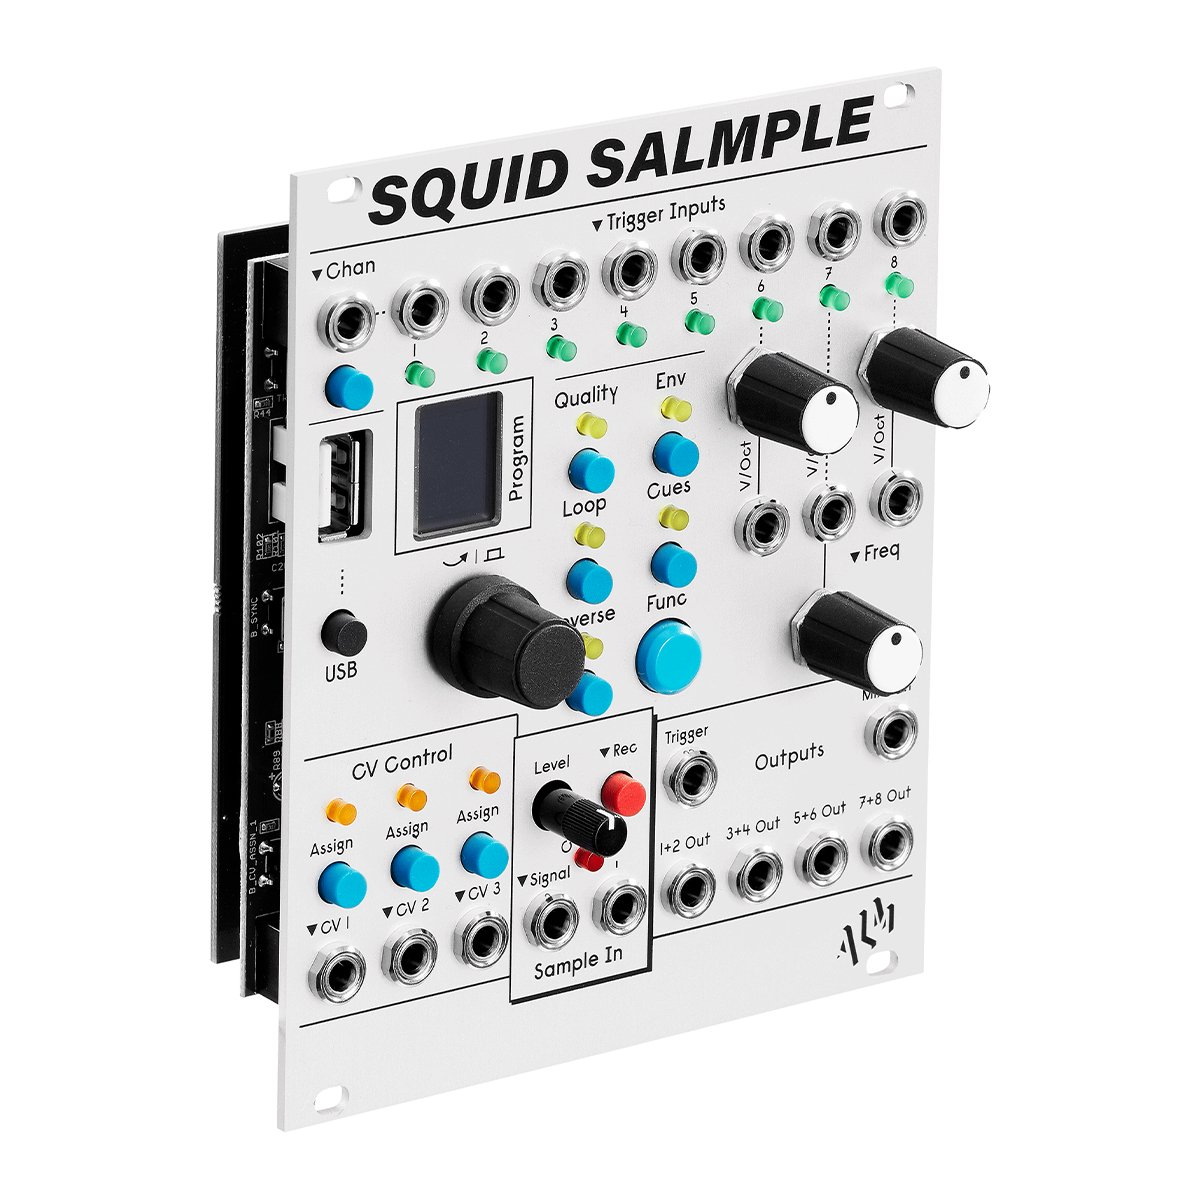 ALM Busy | Squid Salmple | - モジュラーシンセ | Five G music technology